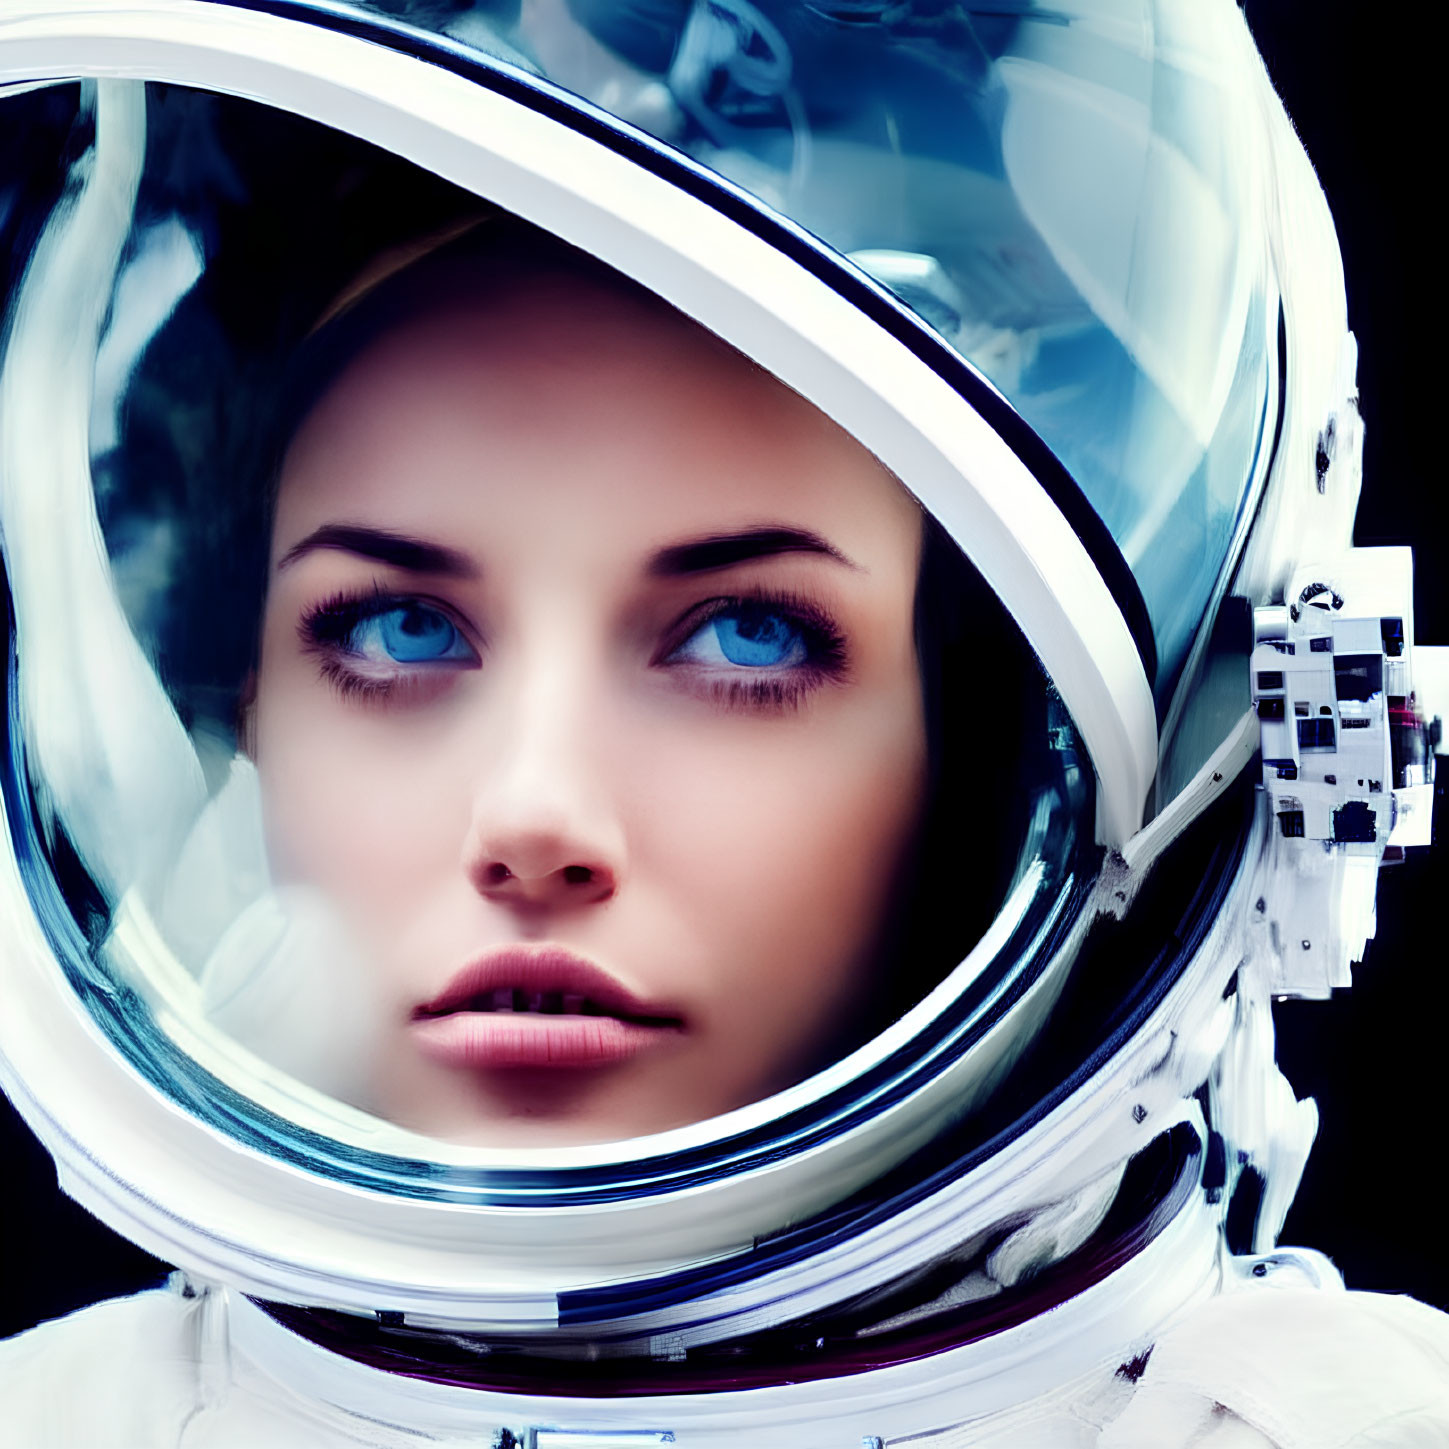 Person in space helmet with focused gaze and shuttle reflection.